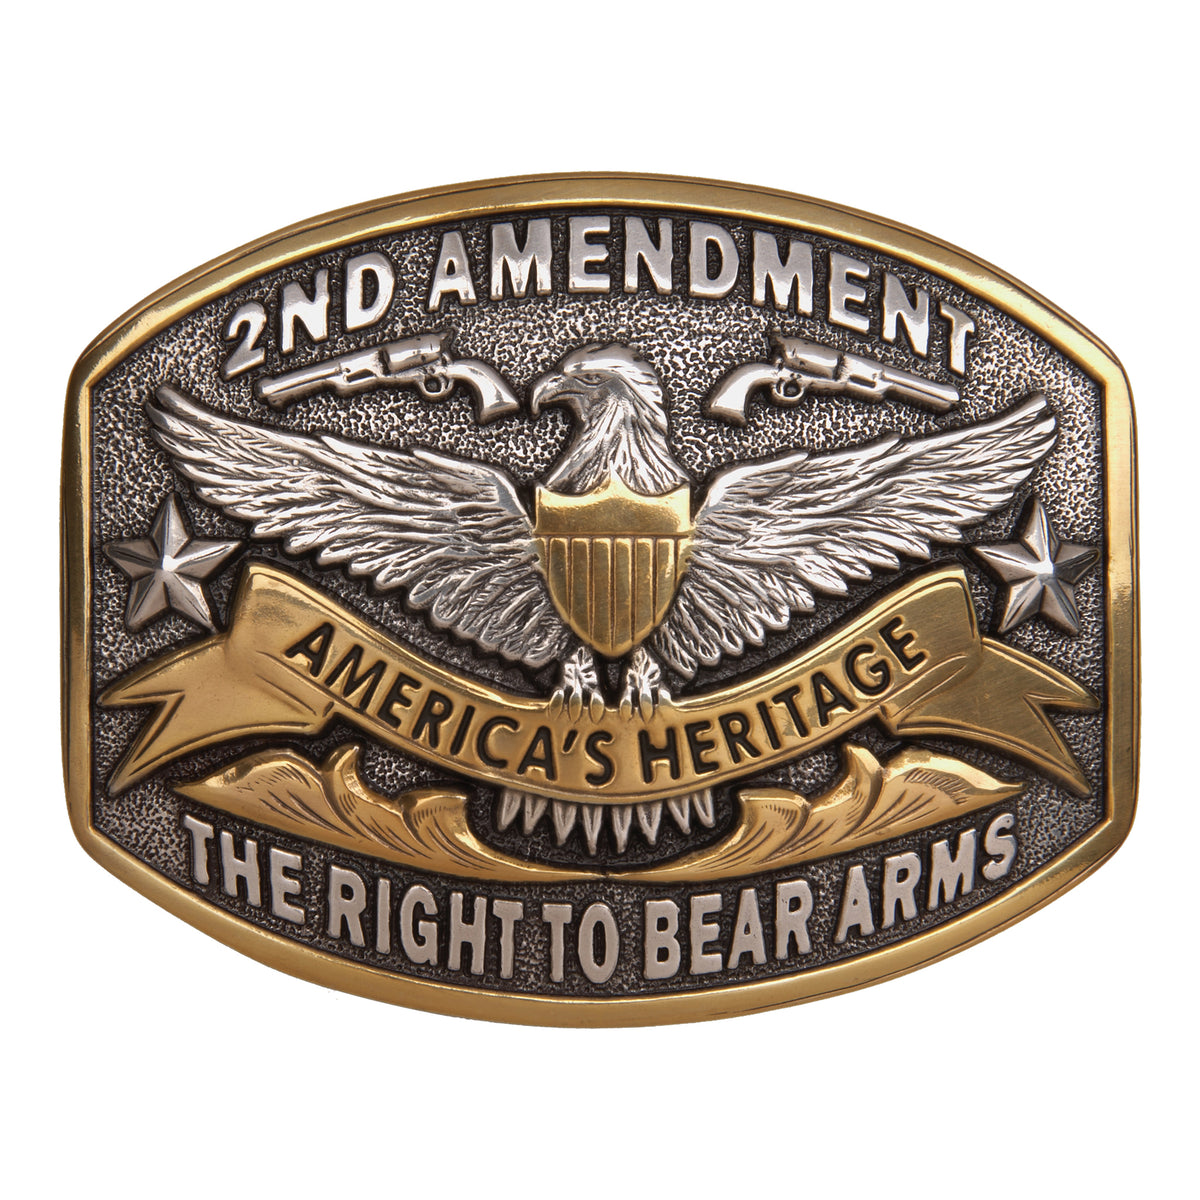 2nd Amendment, The Right to Bear Arms Buckle